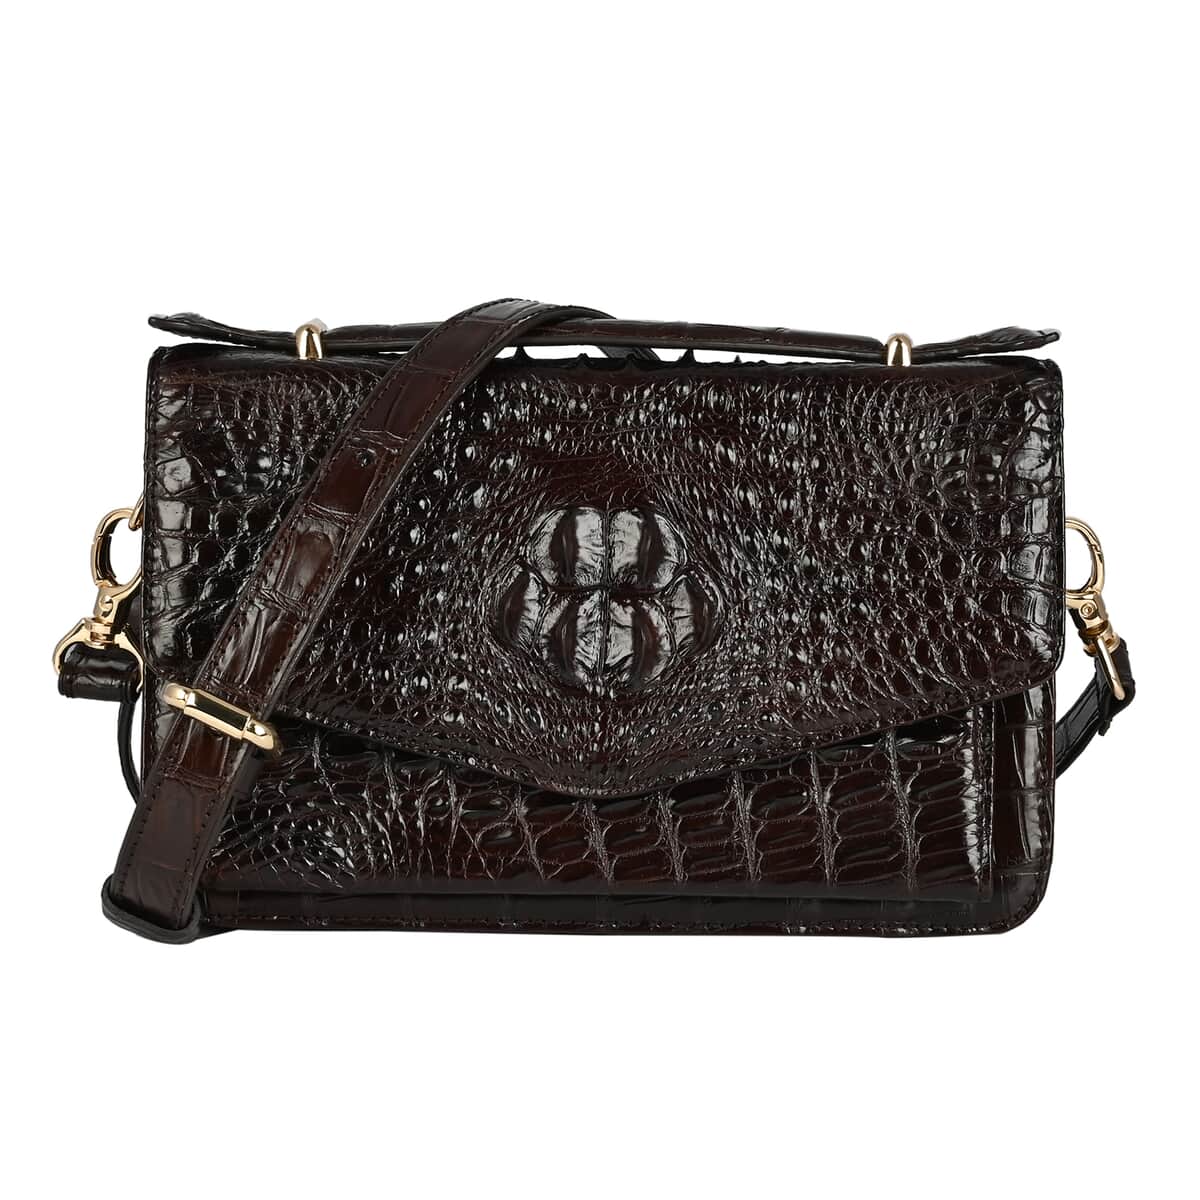 THE PELLE Dark Chocolate Genuine Crocodile Leather Shell Along with Cow Leather Lining Crossbody Bag (8.66"x3.2"x5.5") with Shoulder Strap image number 0